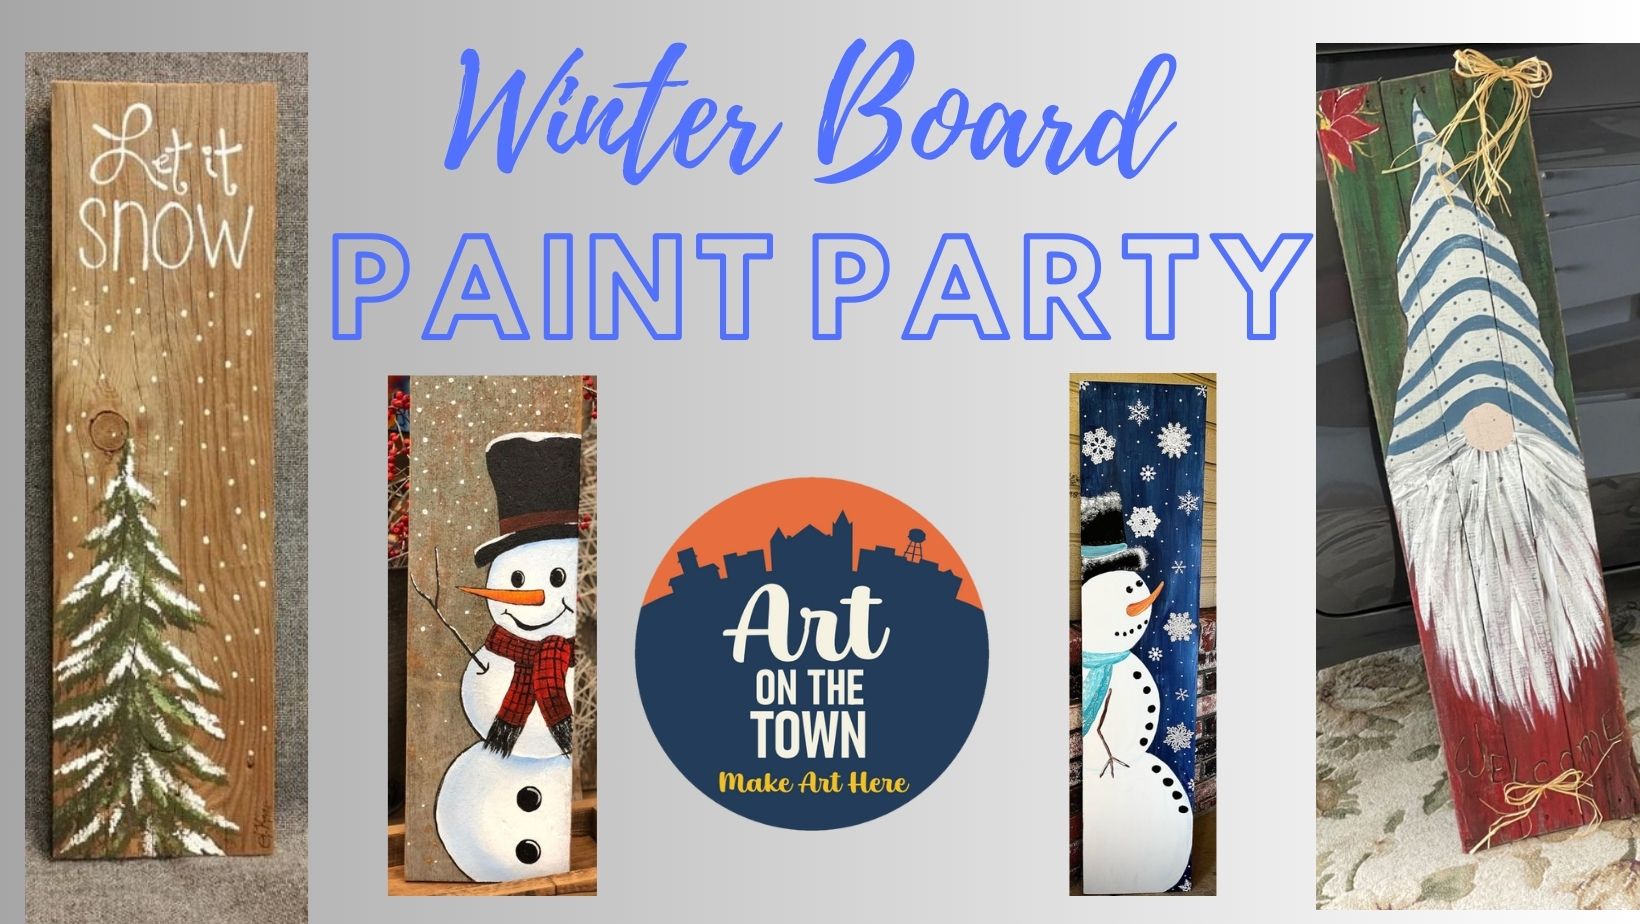 Winter Board Paint Party